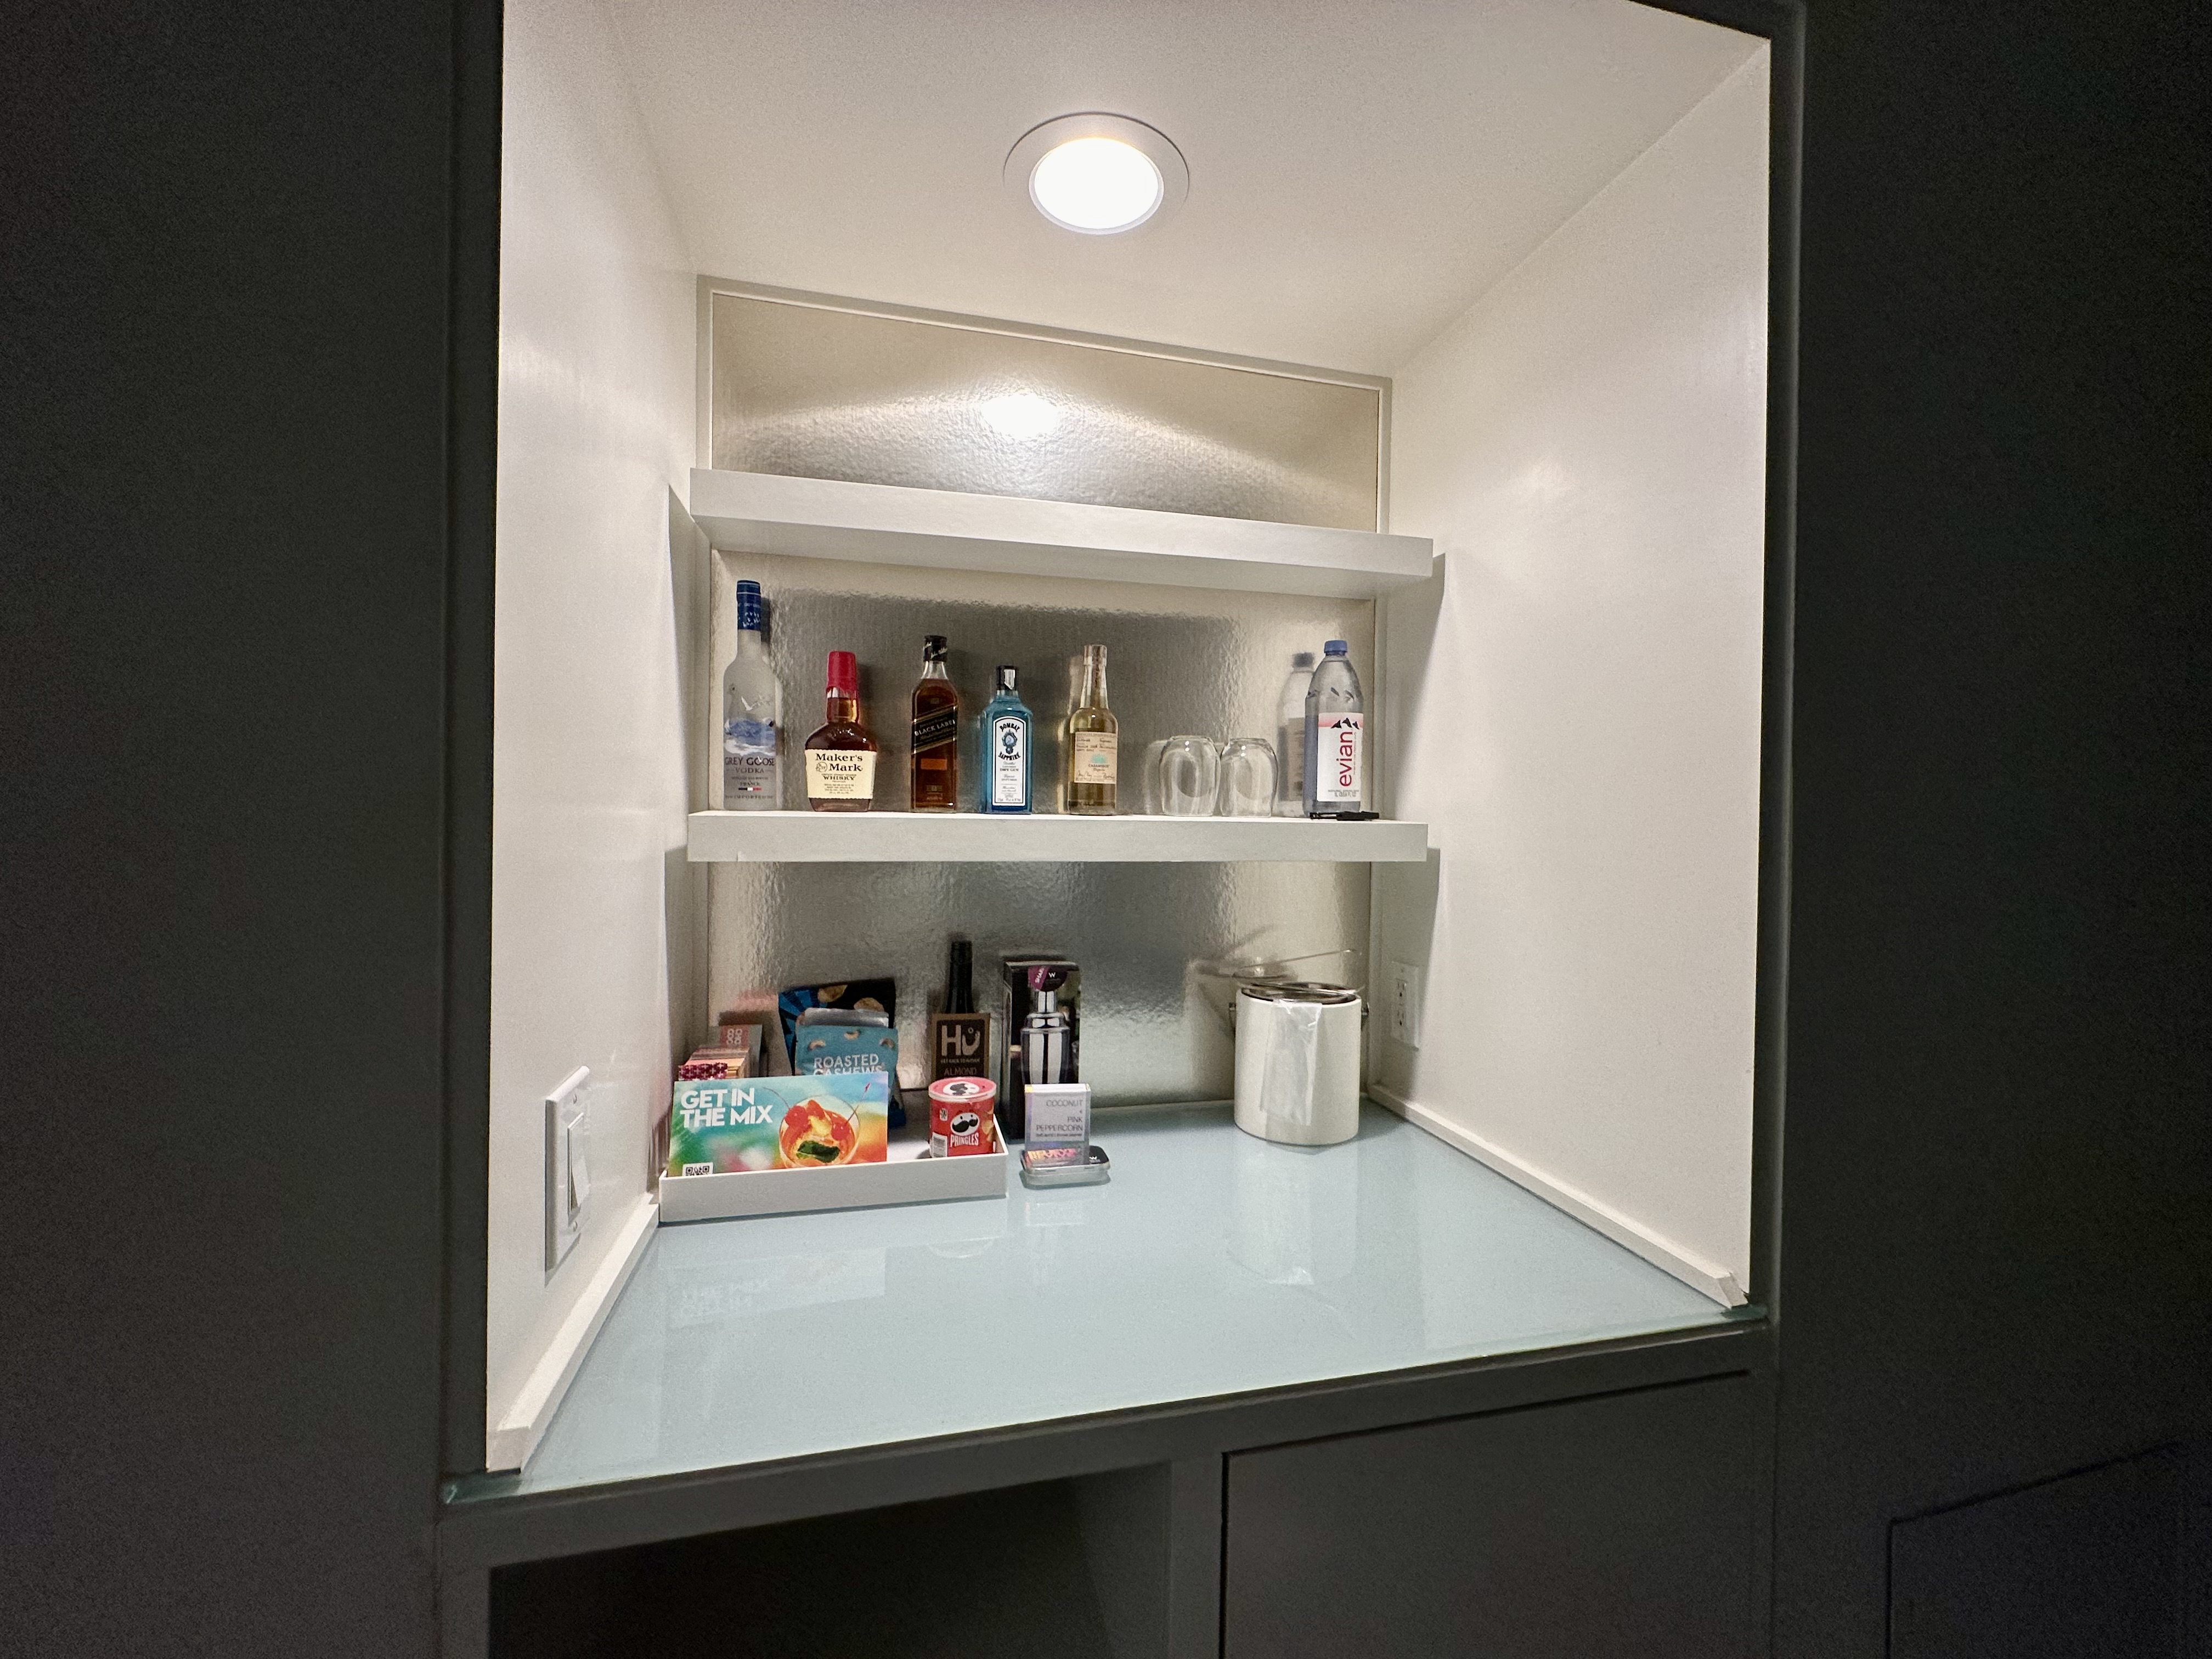 a shelf with bottles and other items inside a cabinet